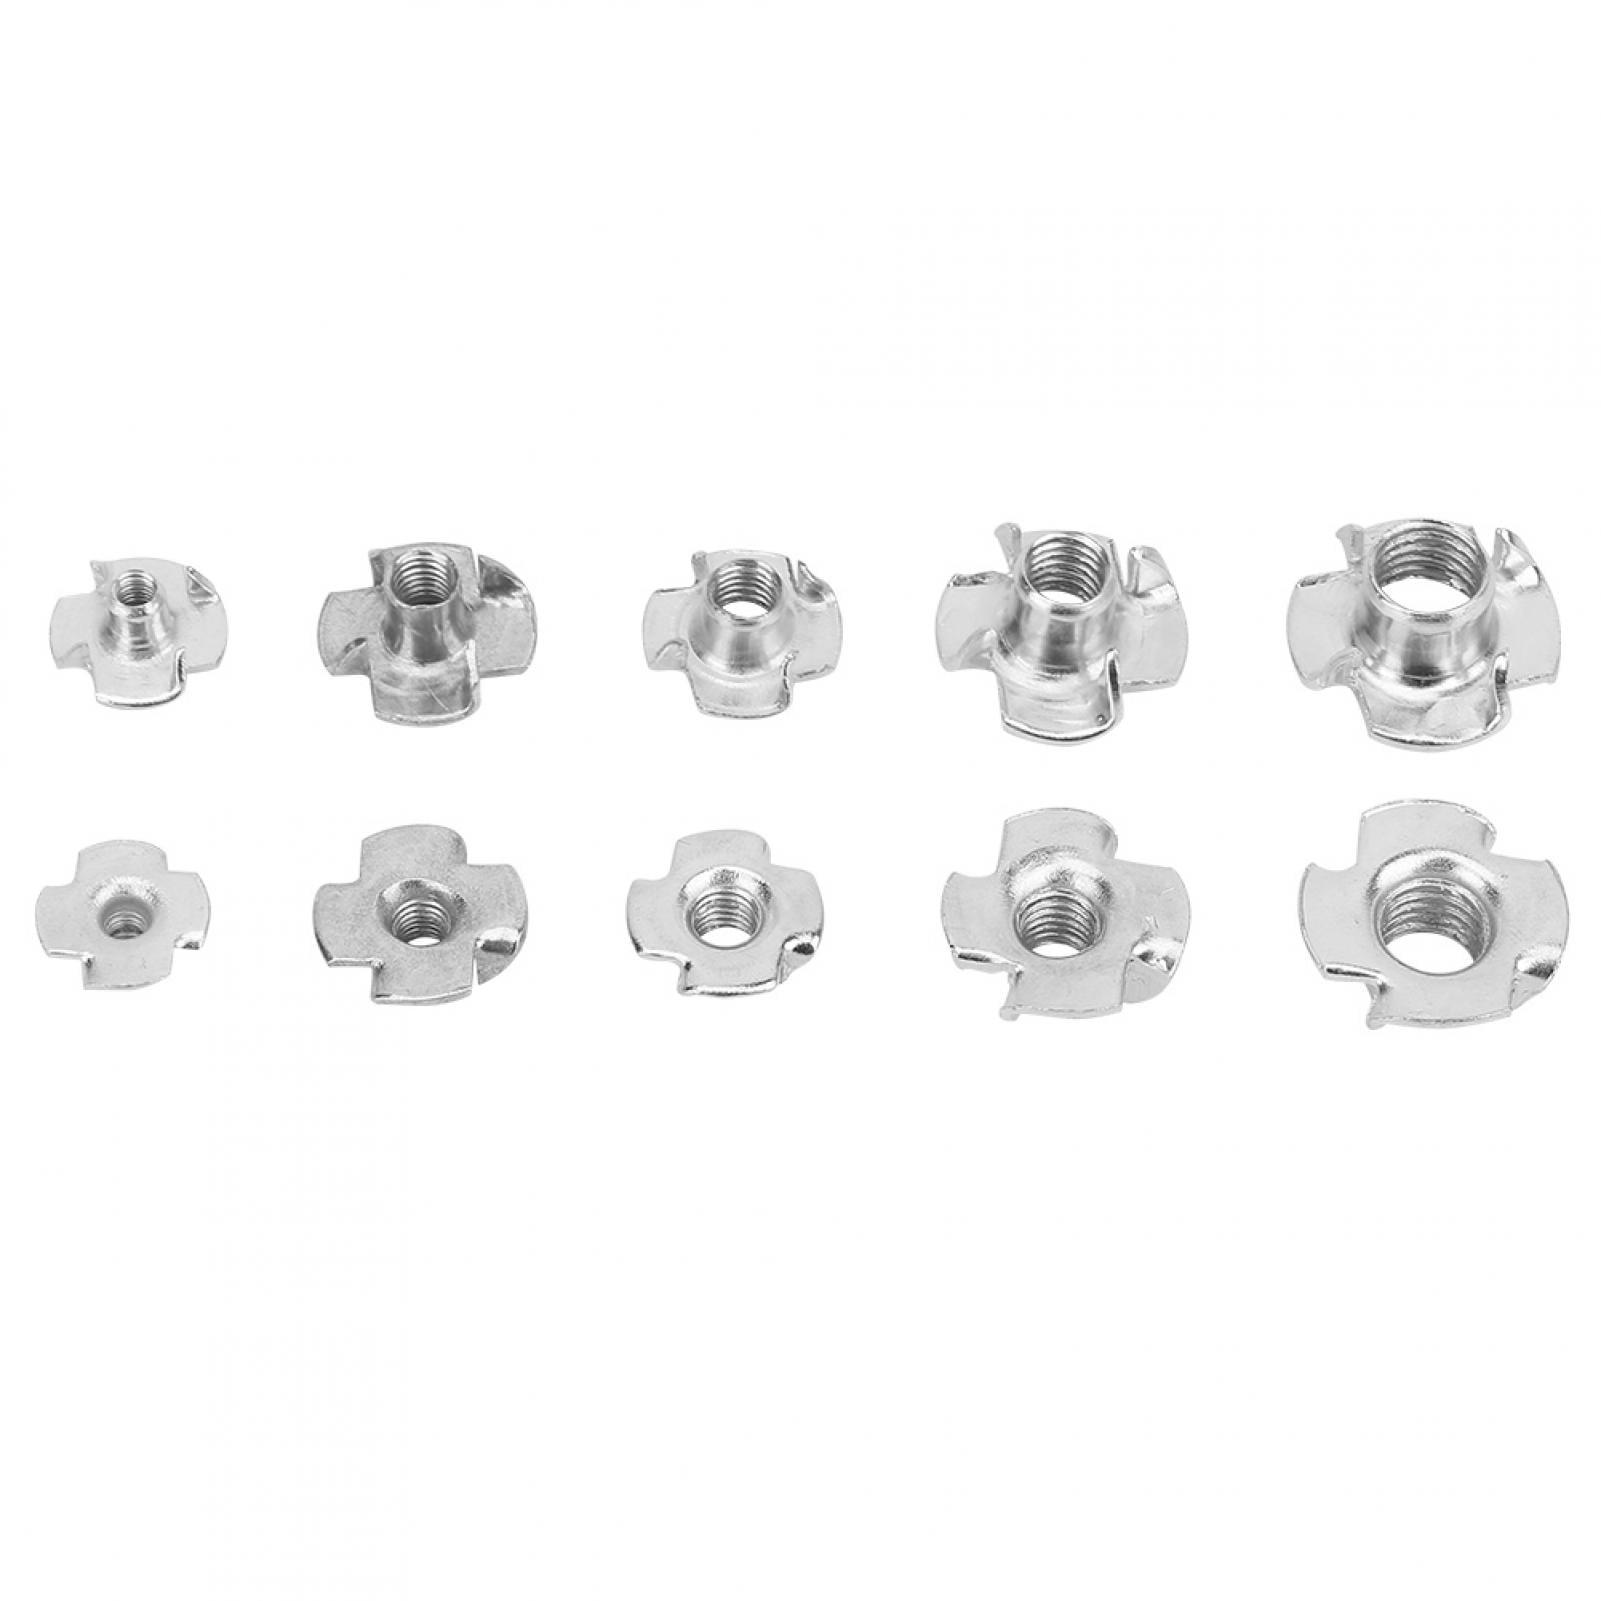 80pcs Zinc Plated Carbon Steel T Nut Four-Pronged M3/4/5/6/8 Tee Nuts Kits for Woodworking Furniture 